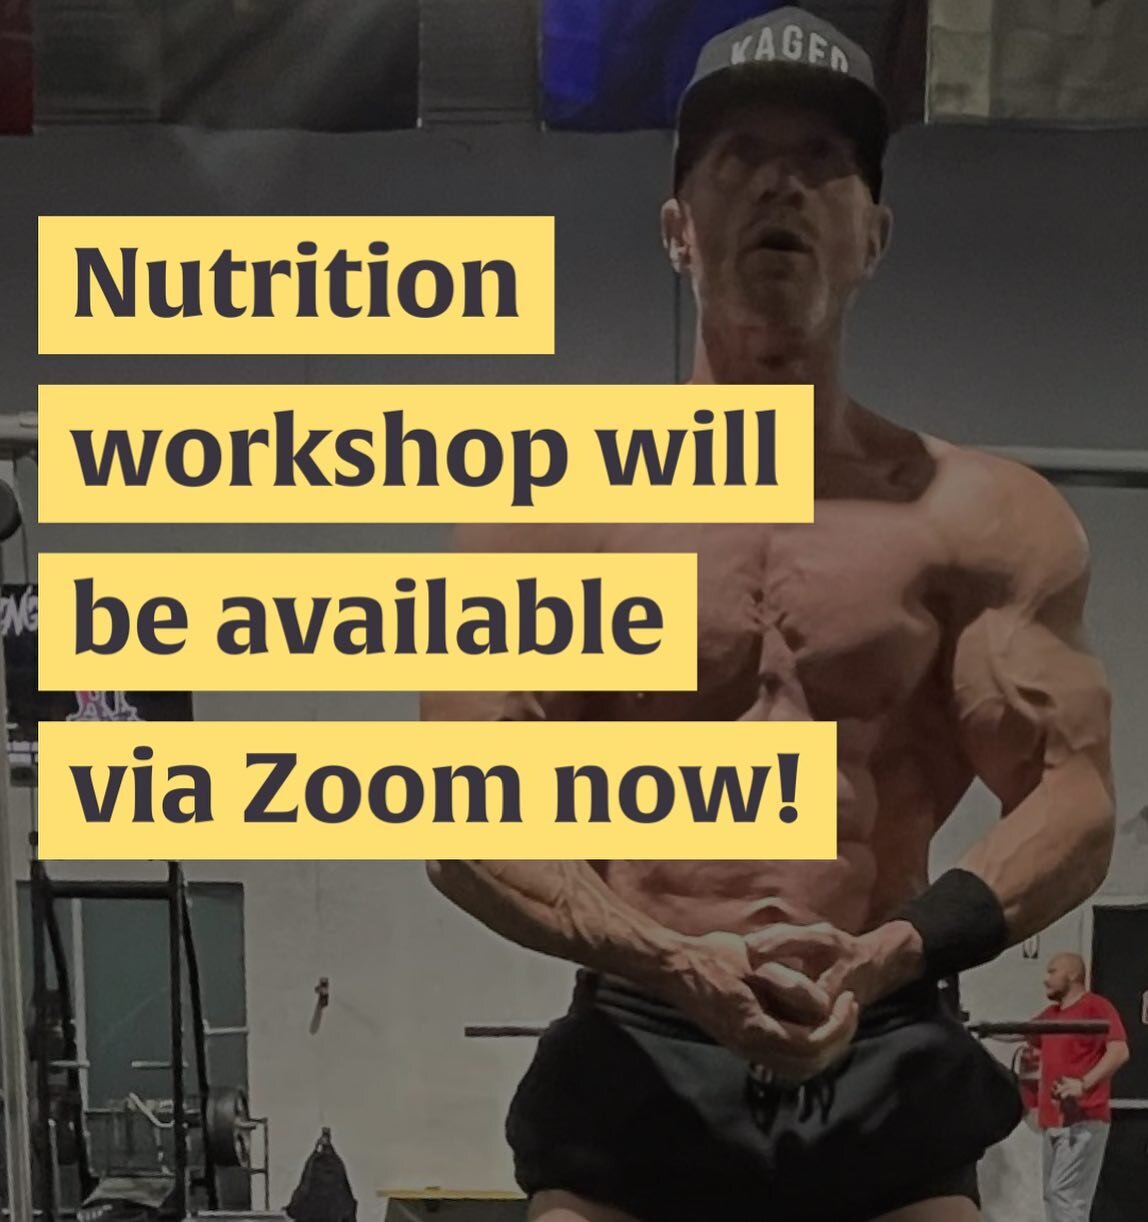 Our nutrition workshop with @aabaulch1970 is one week away! It&rsquo;ll be May 13th from 10:30am-12:30m and it&rsquo;s available via zoom now also!
🔻
Link is in bio or right here:
https://movlab.janeapp.com/locations/group-classes/book#staff_member/